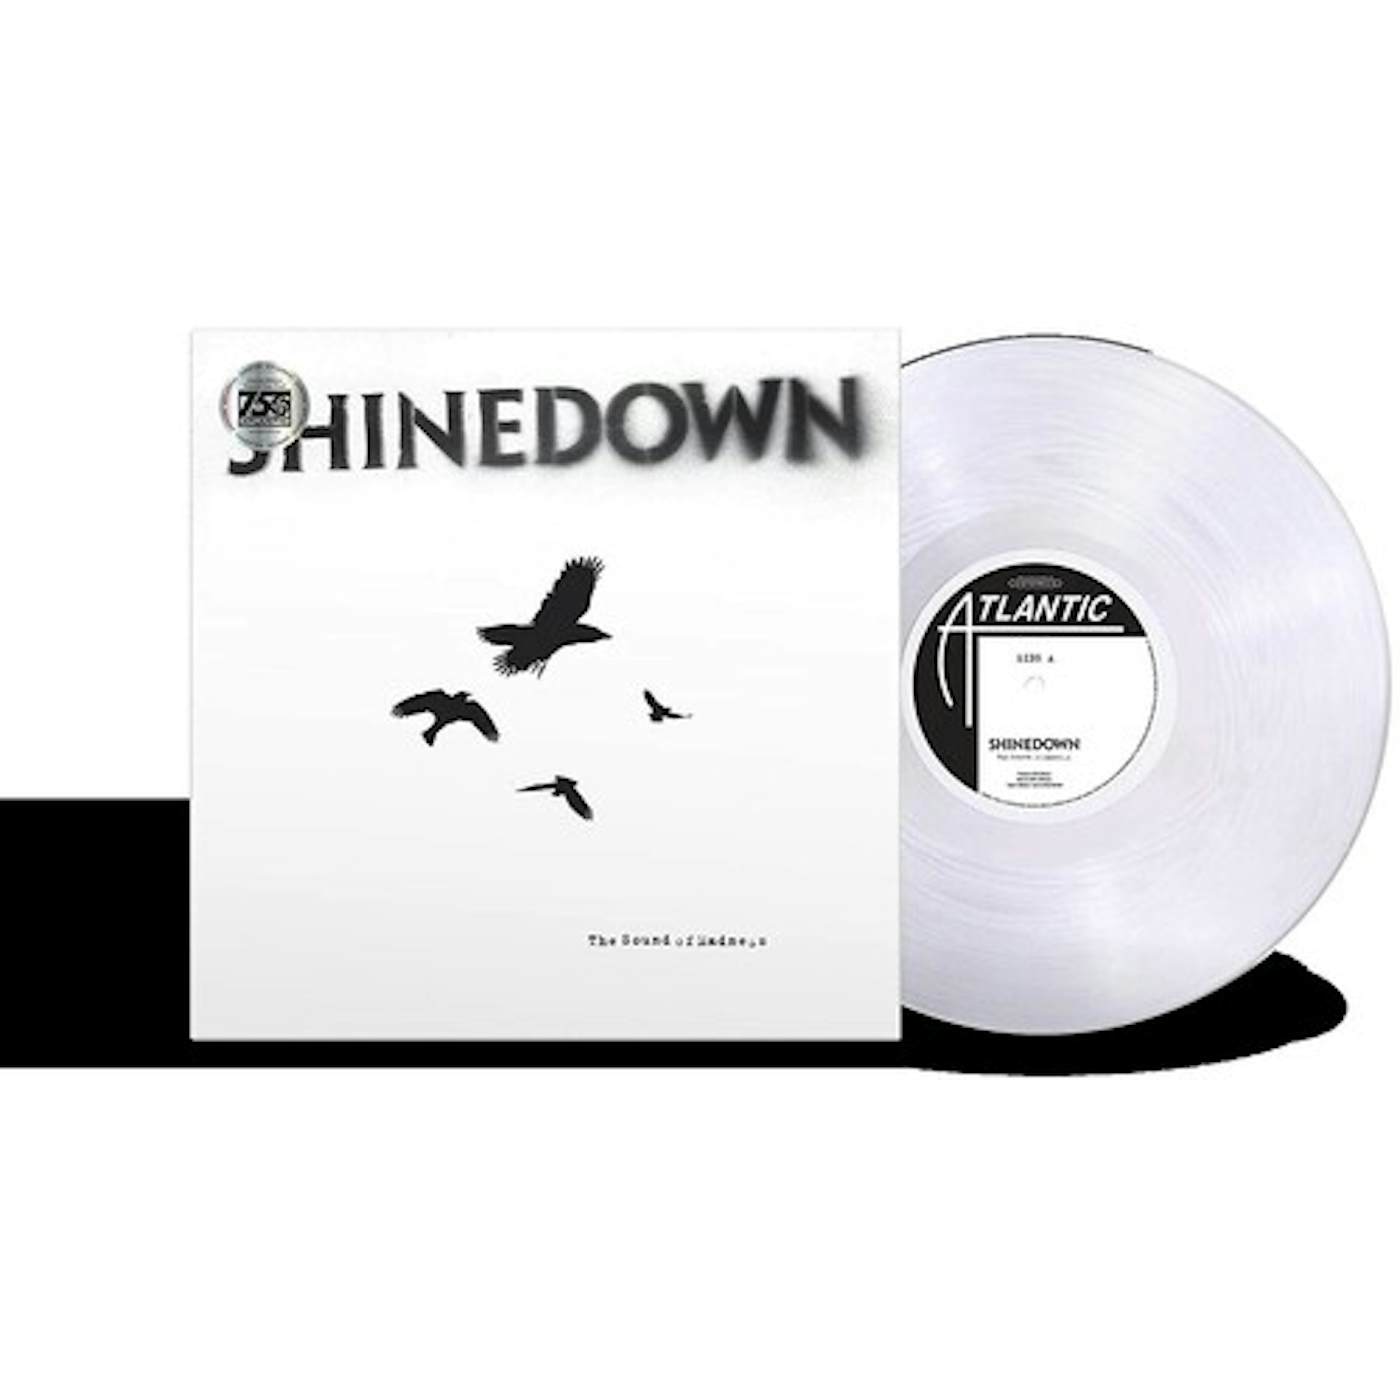 Shinedown The Sound Of Madness (Crystal Clear) Vinyl Record